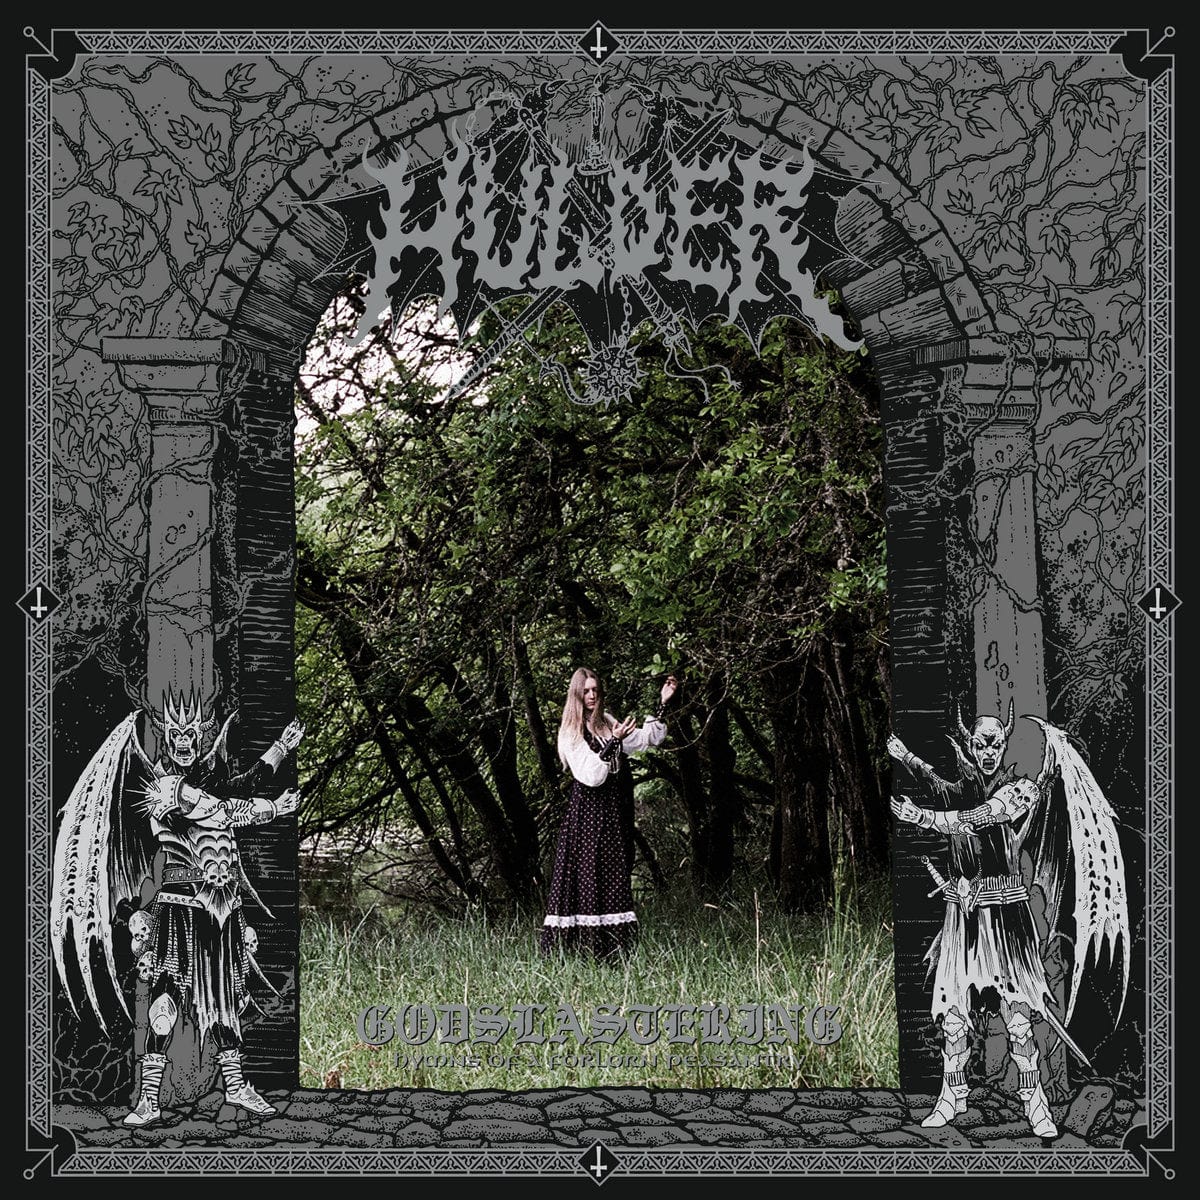 20 Buck Spin CD Hulder &quot;Godslastering: Hymns Of A Forlorn Peasantry&quot; CD